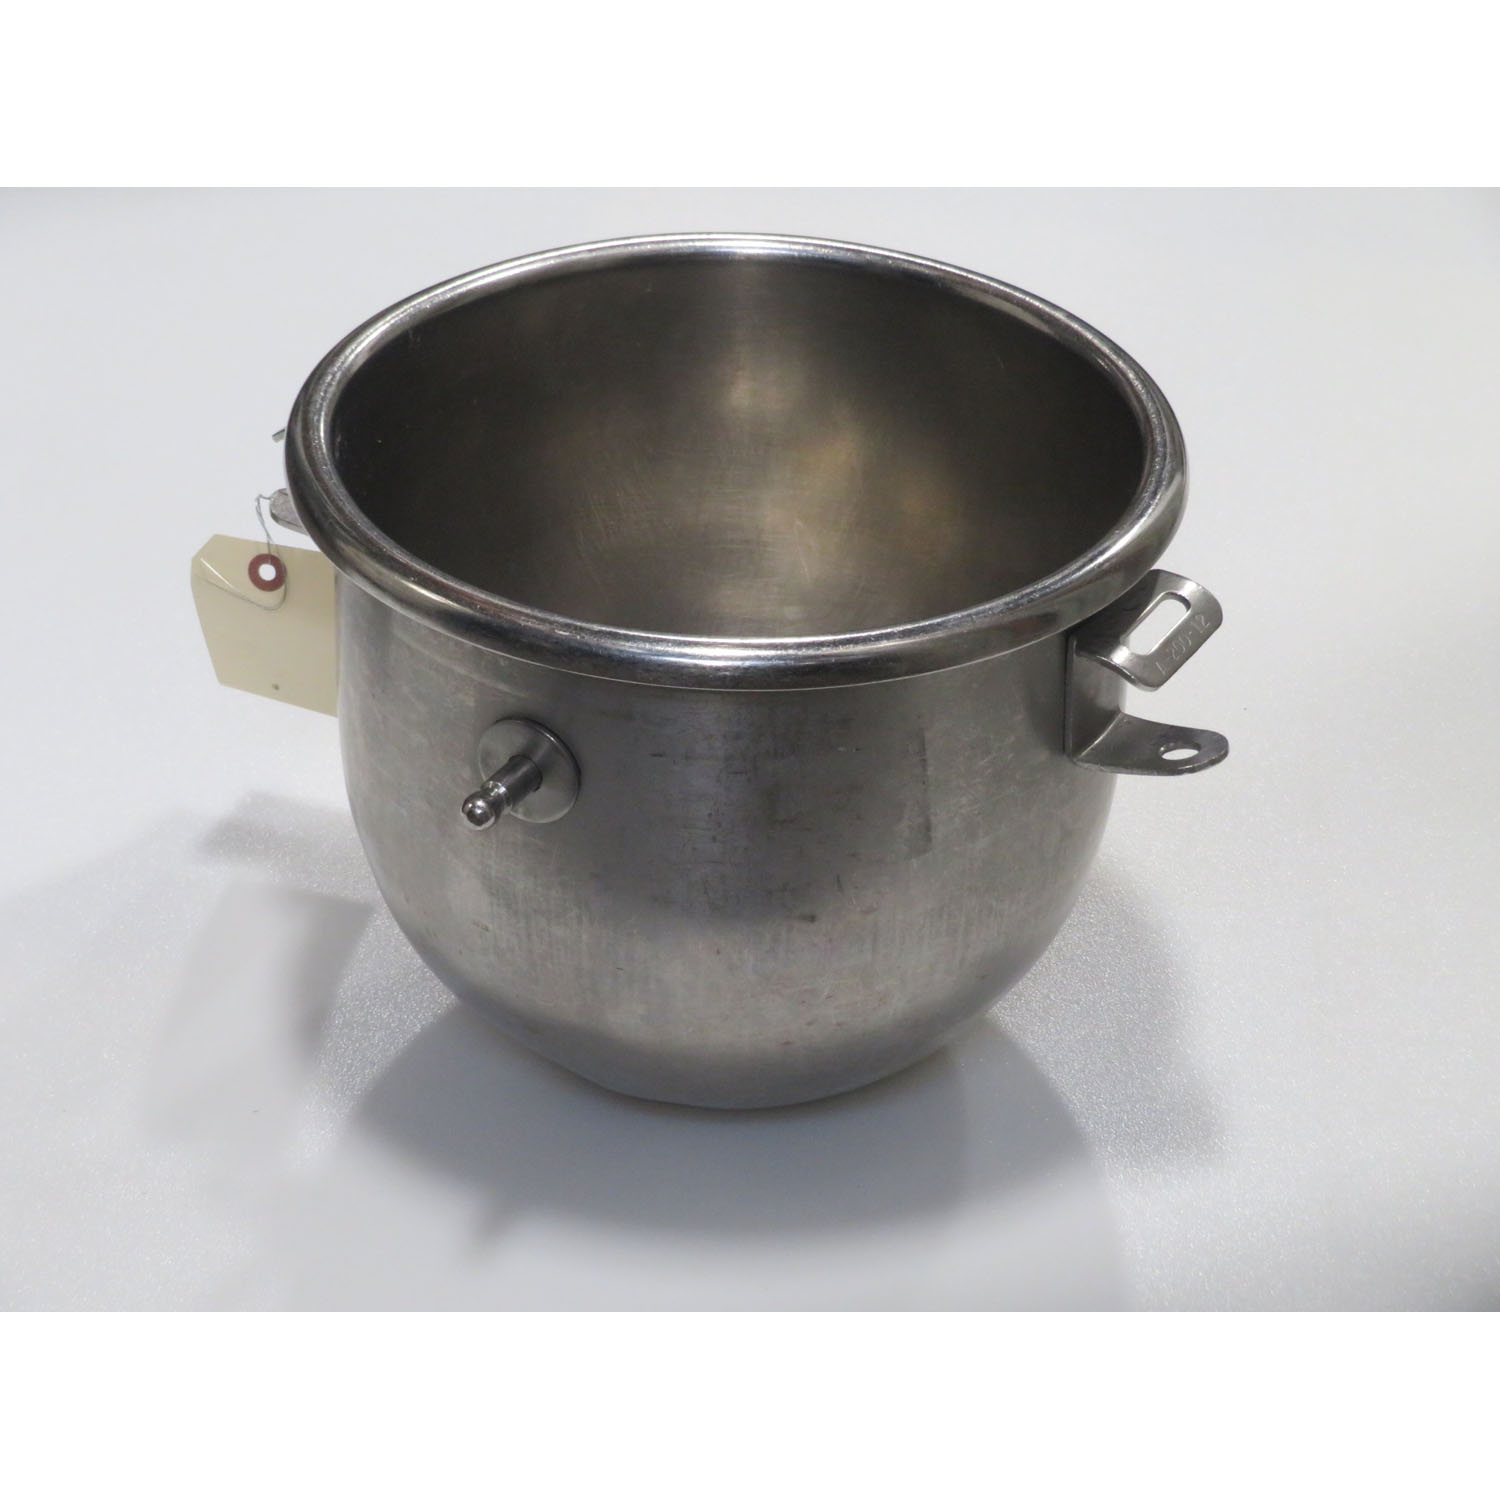 Hobart 00-295644 12 Quart Bowl to Fit A200 Mixer, Used Great Condition image 1